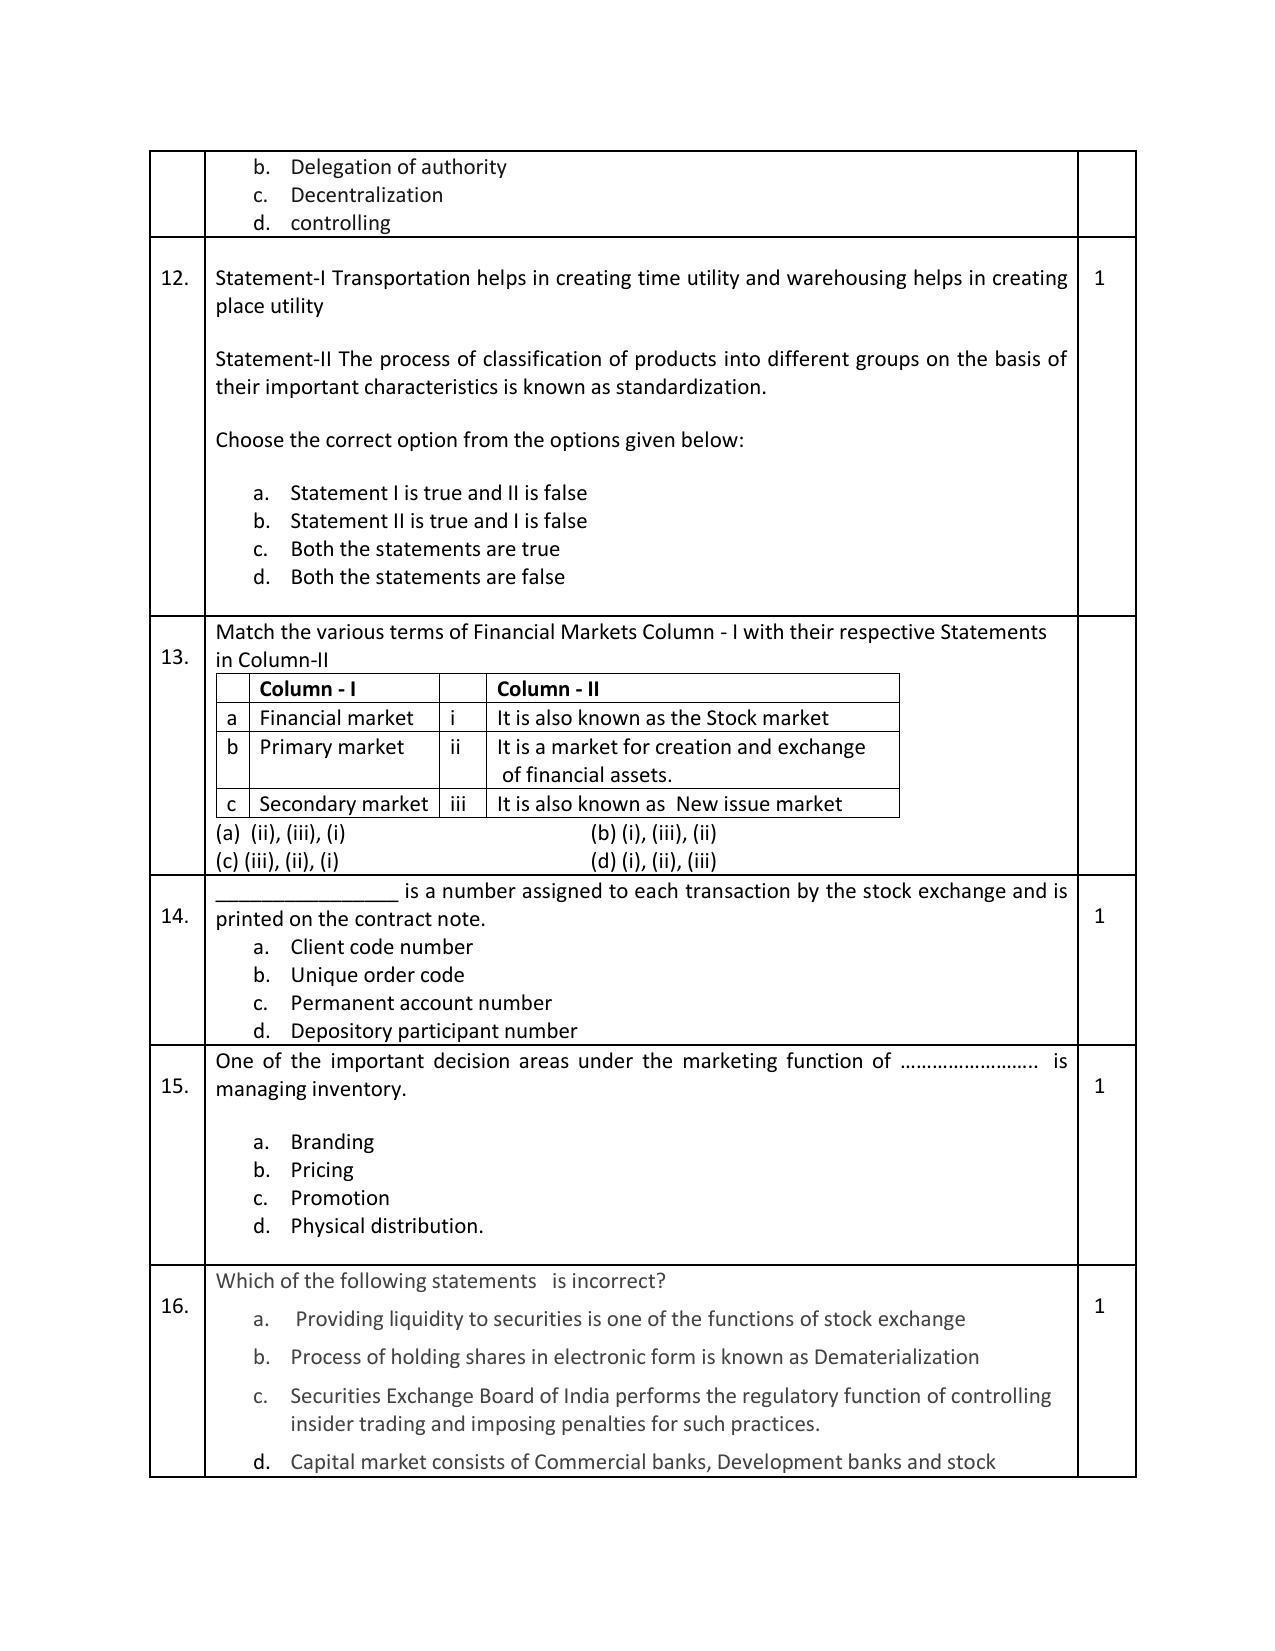 CBSE Class 12 Business Studies Sample Paper 2023 - Page 4